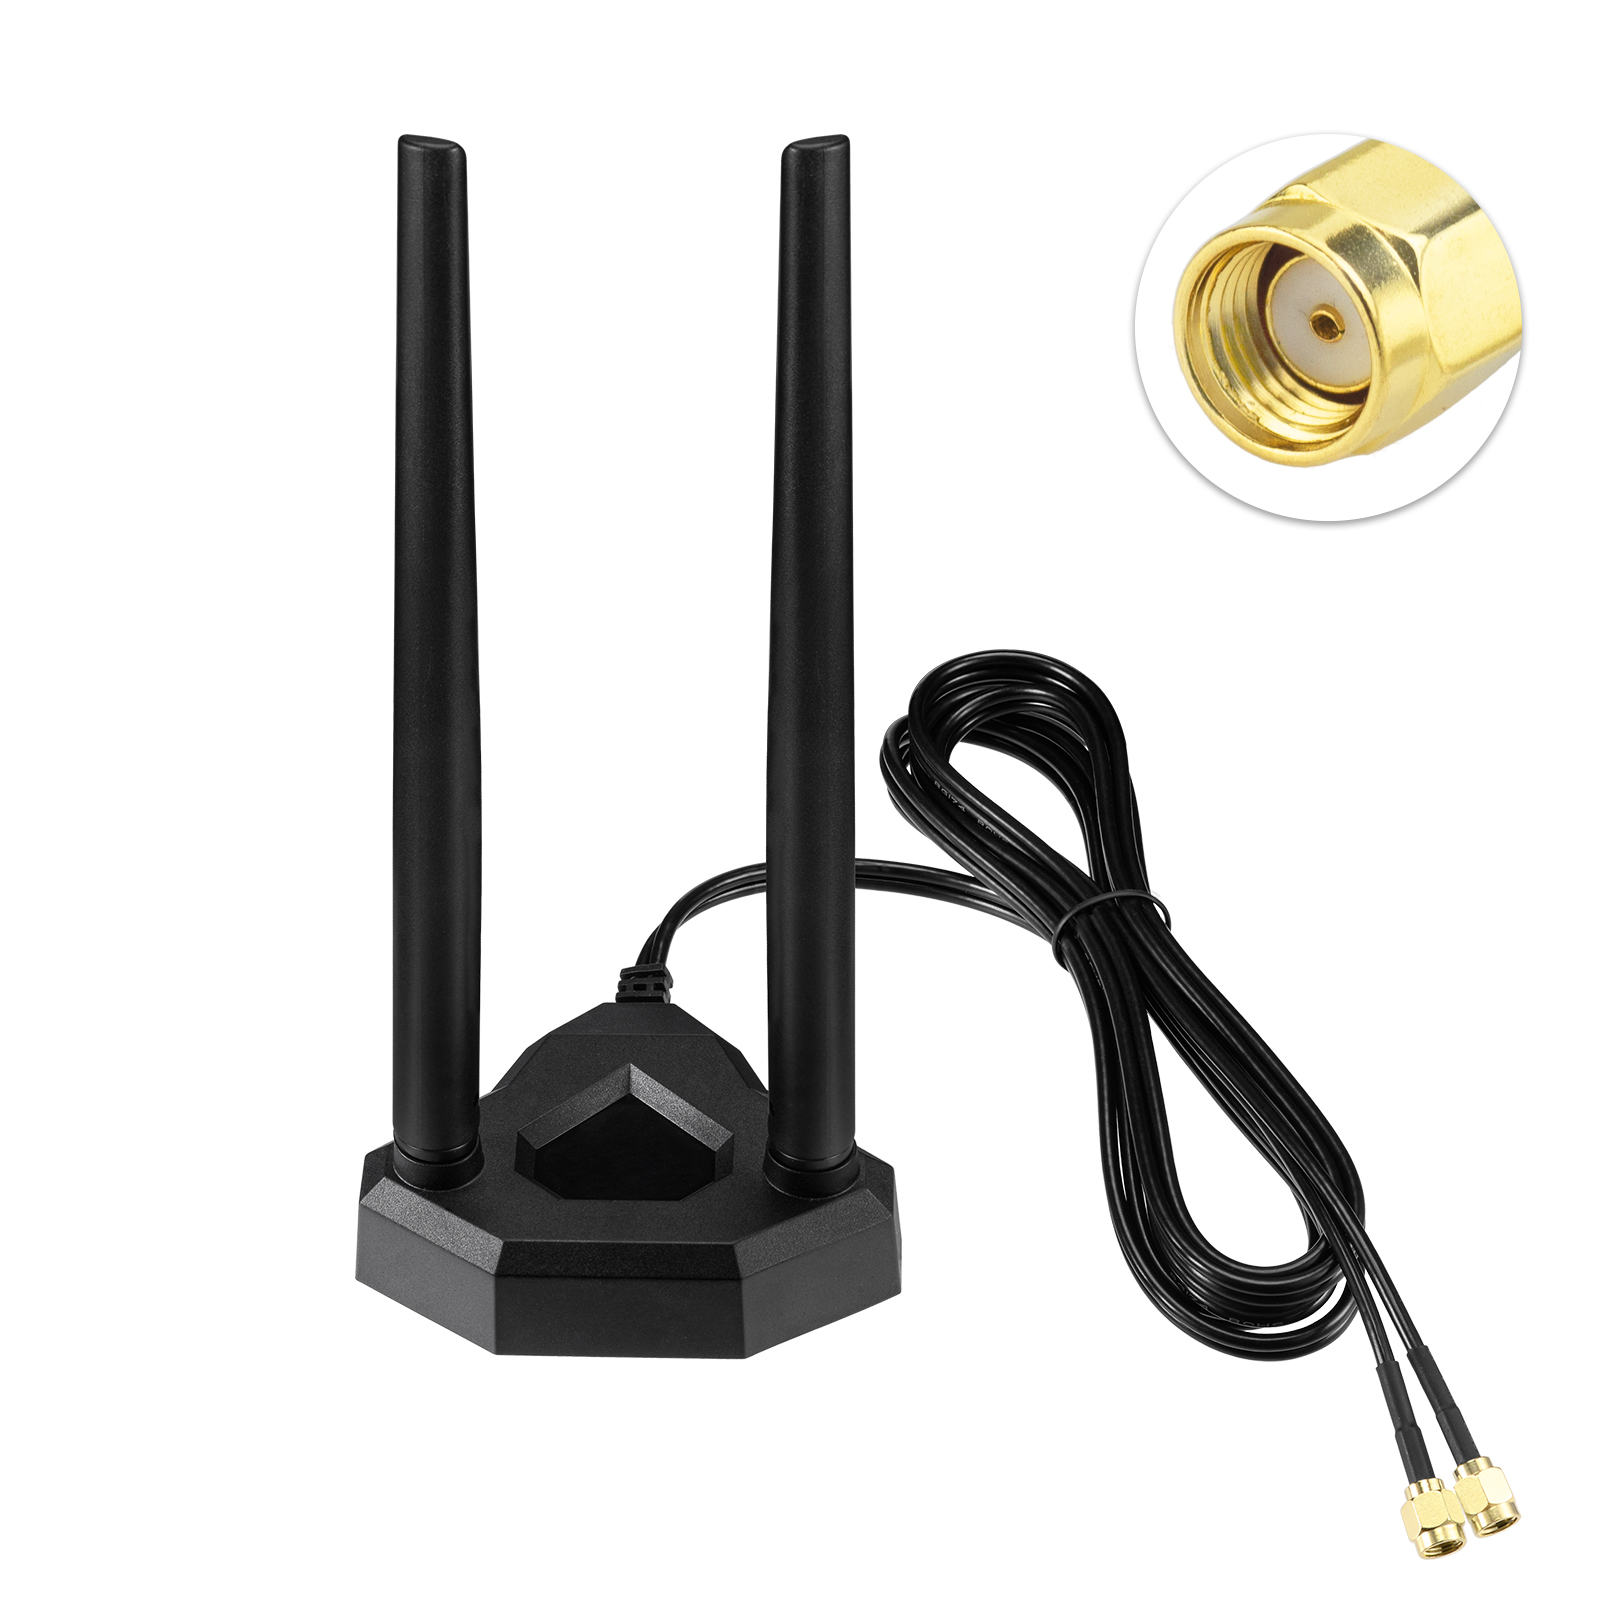 Router 1 X New Dual Band 2.4/5.8Ghz 2dBi RP-SMA Antenna for Wireless LAN 